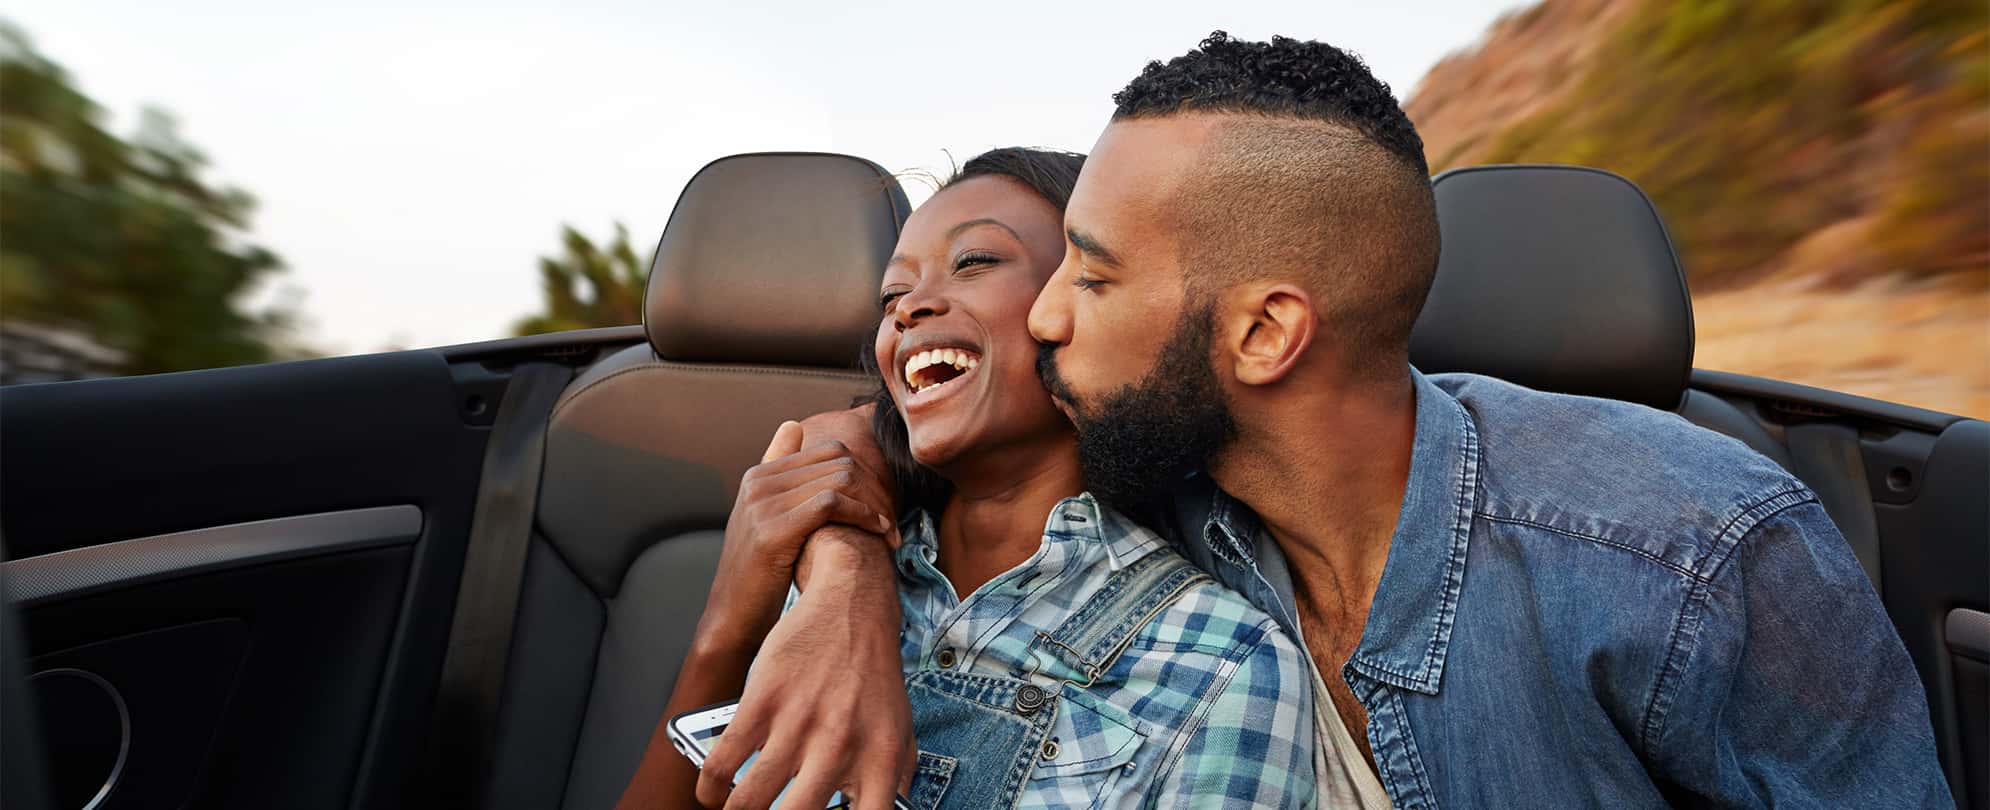 A man kisses a woman on the cheek as they drive their convertible on a road trip vacation